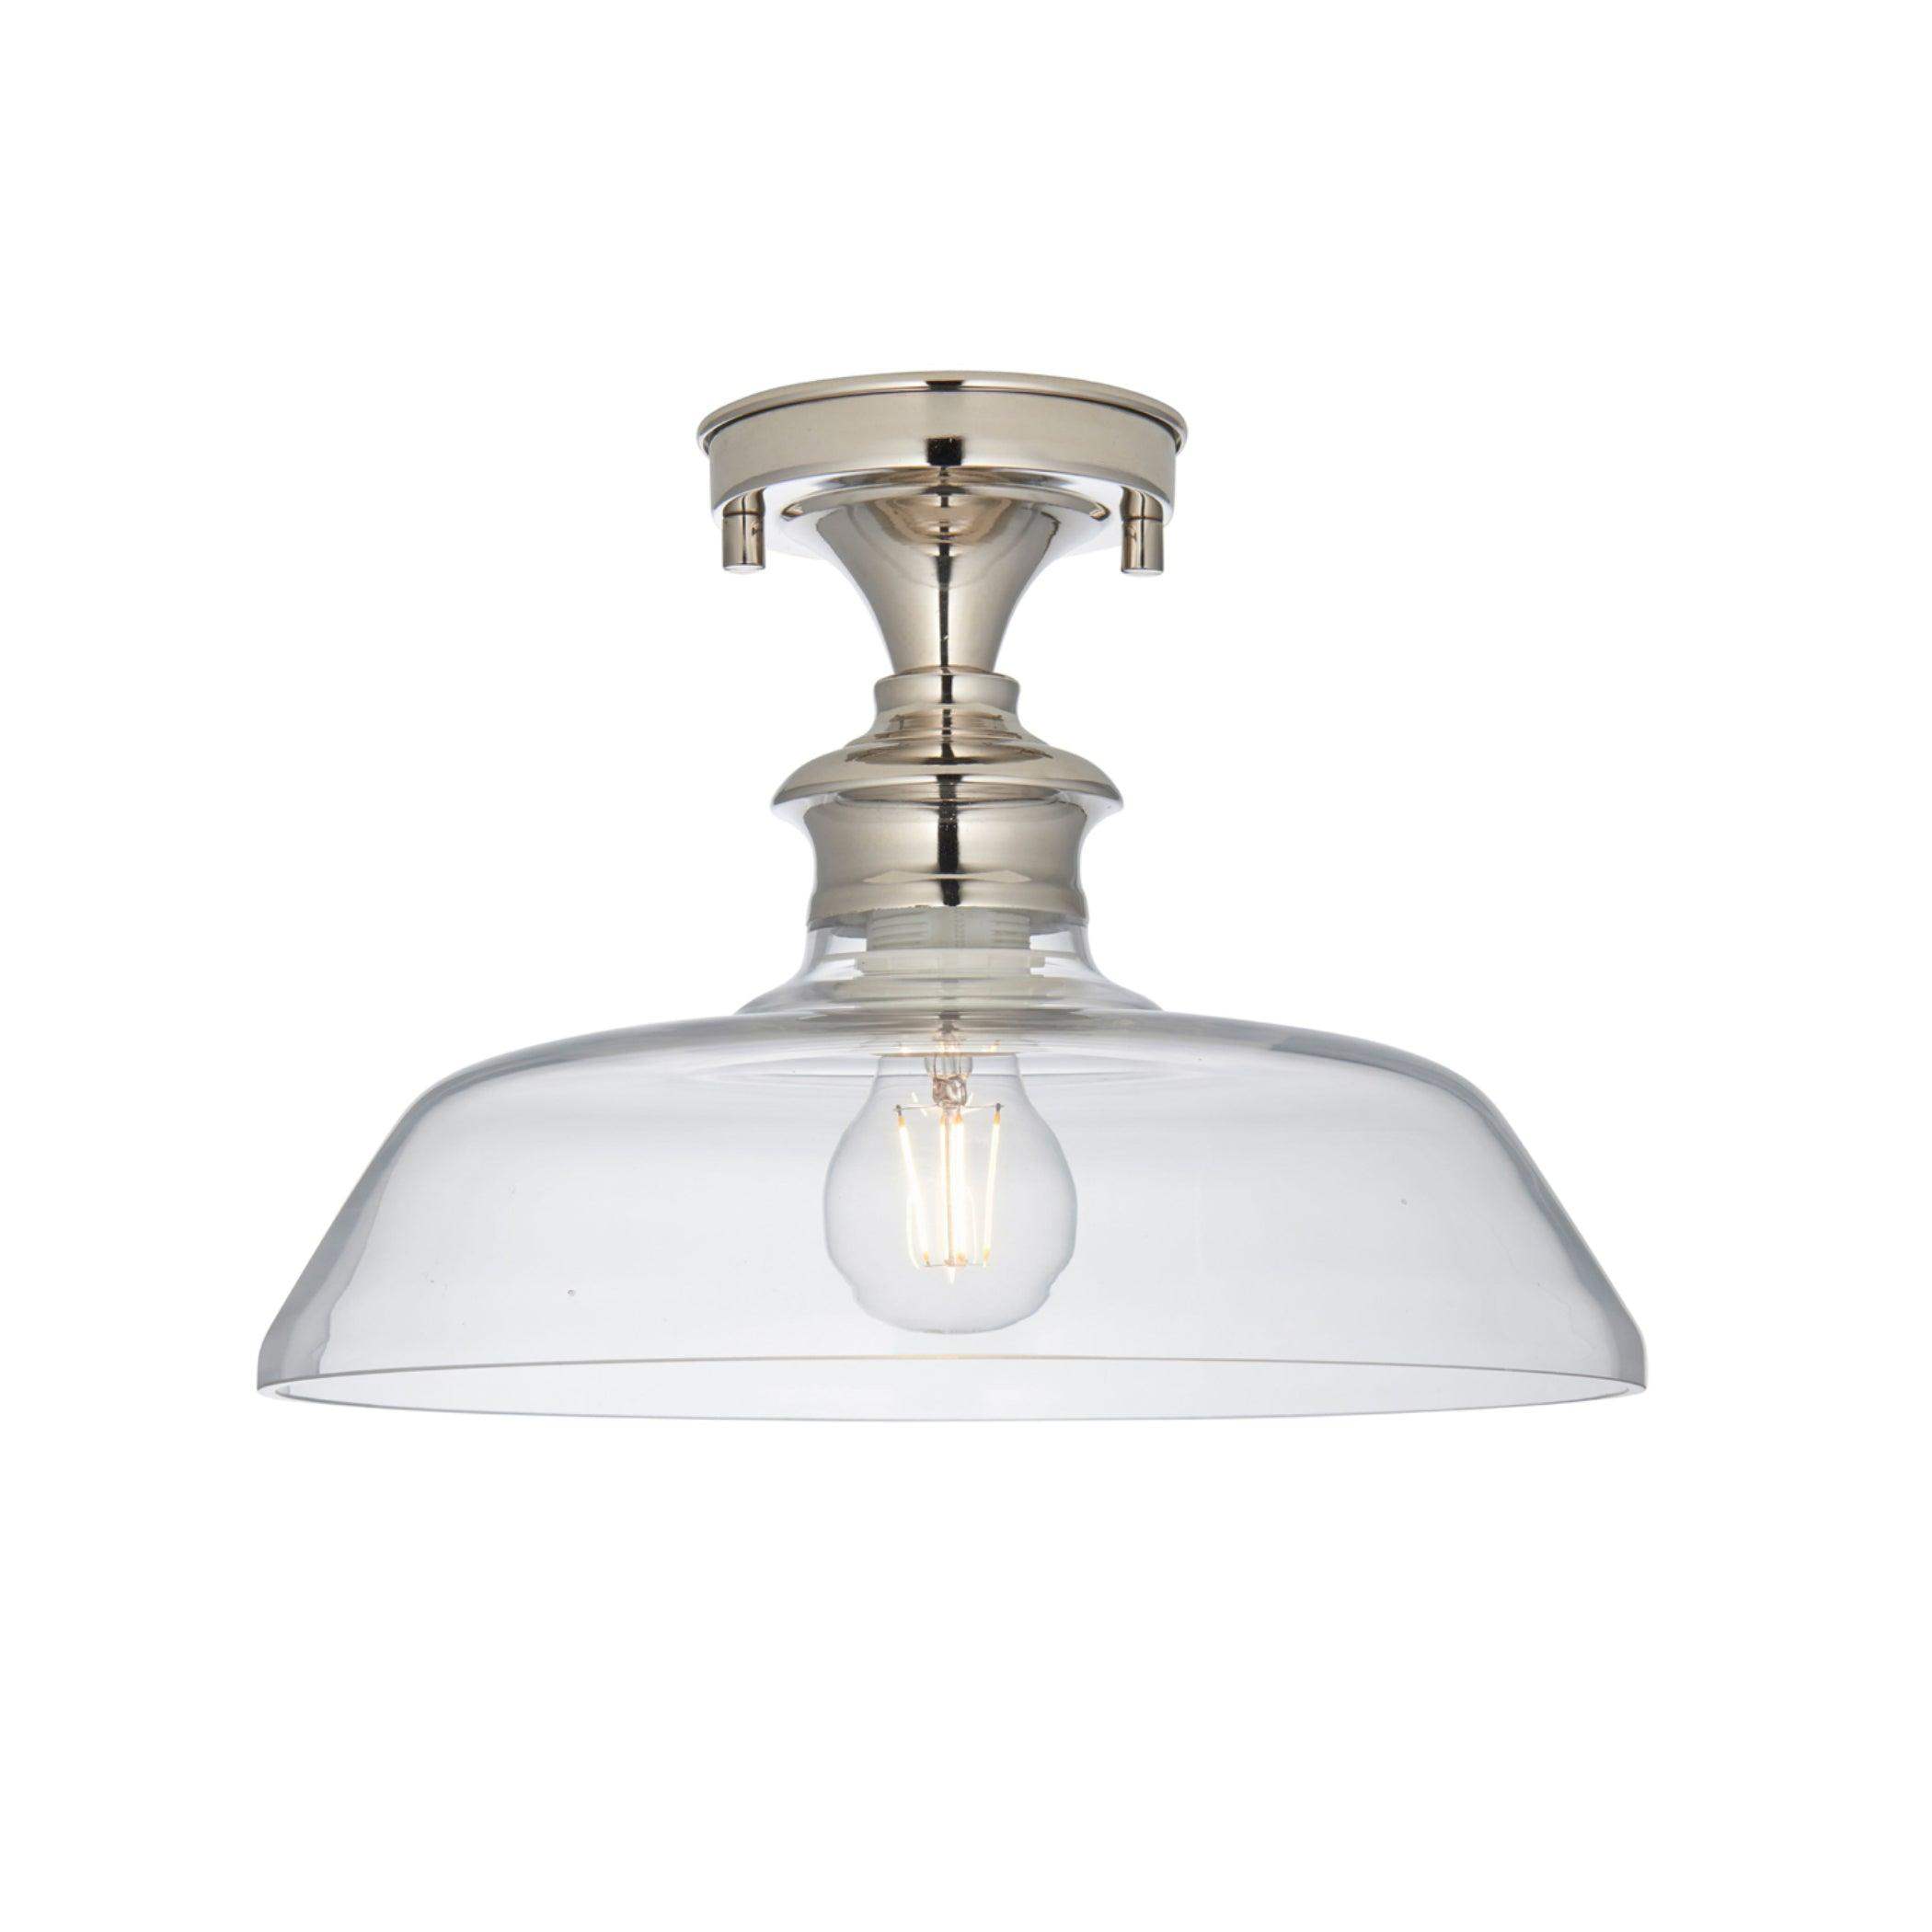 Nickel and Glass Dorset Ceiling Light 1